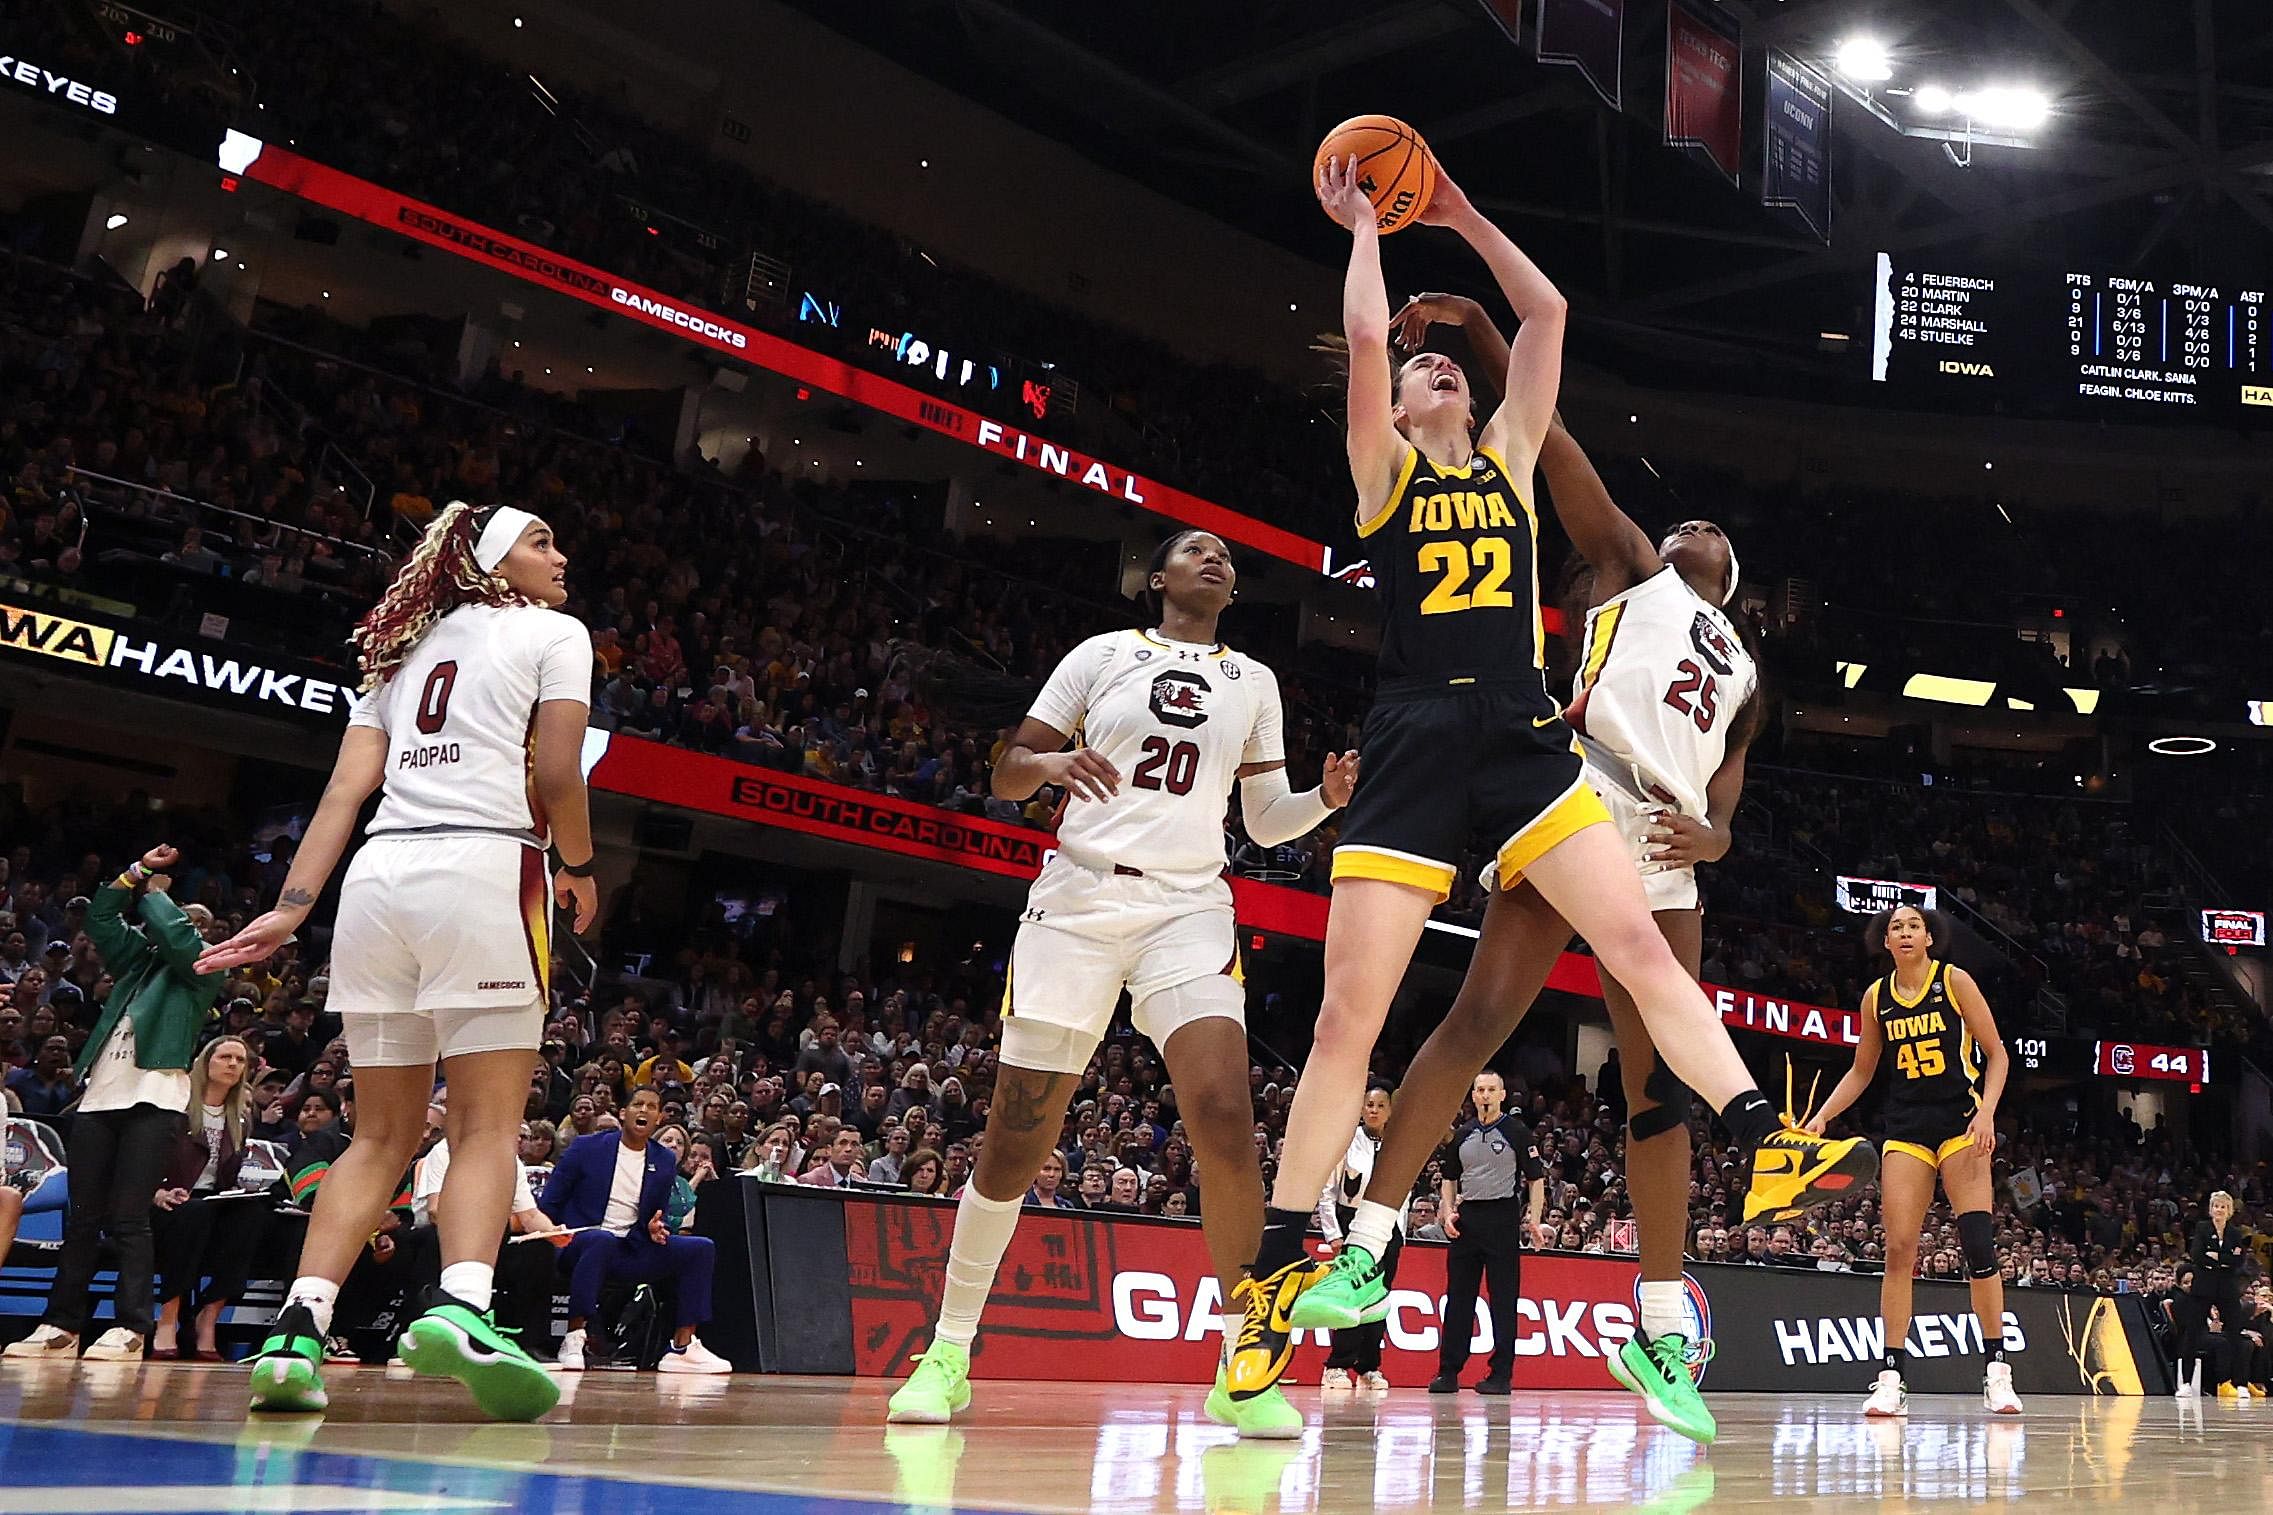 Caitlin Clark sees bright future for women sport after Iowa loss in NCAA basketball